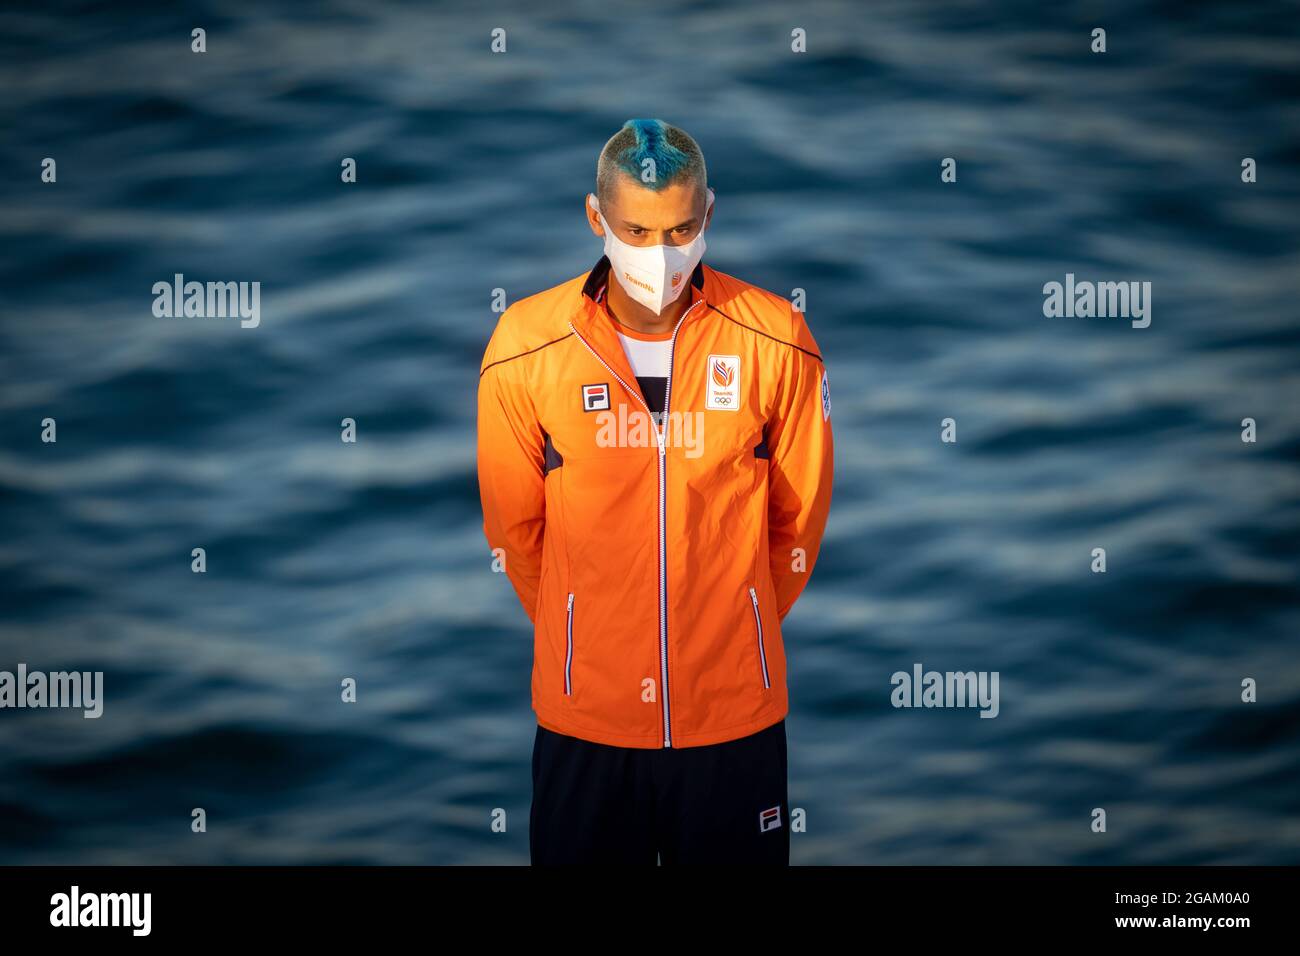 TOKYO, JAPAN - JULY 31: Kiran Badloe of the Netherlands winner of the gold medal during the Medal Ceremony of Sailing during the Tokyo 2020 Olympic Games at the Enoshima on July 31, 2021 in Tokyo, Japan (Photo by Ronald Hoogendoorn/Orange Pictures) NOCNSF Stock Photo